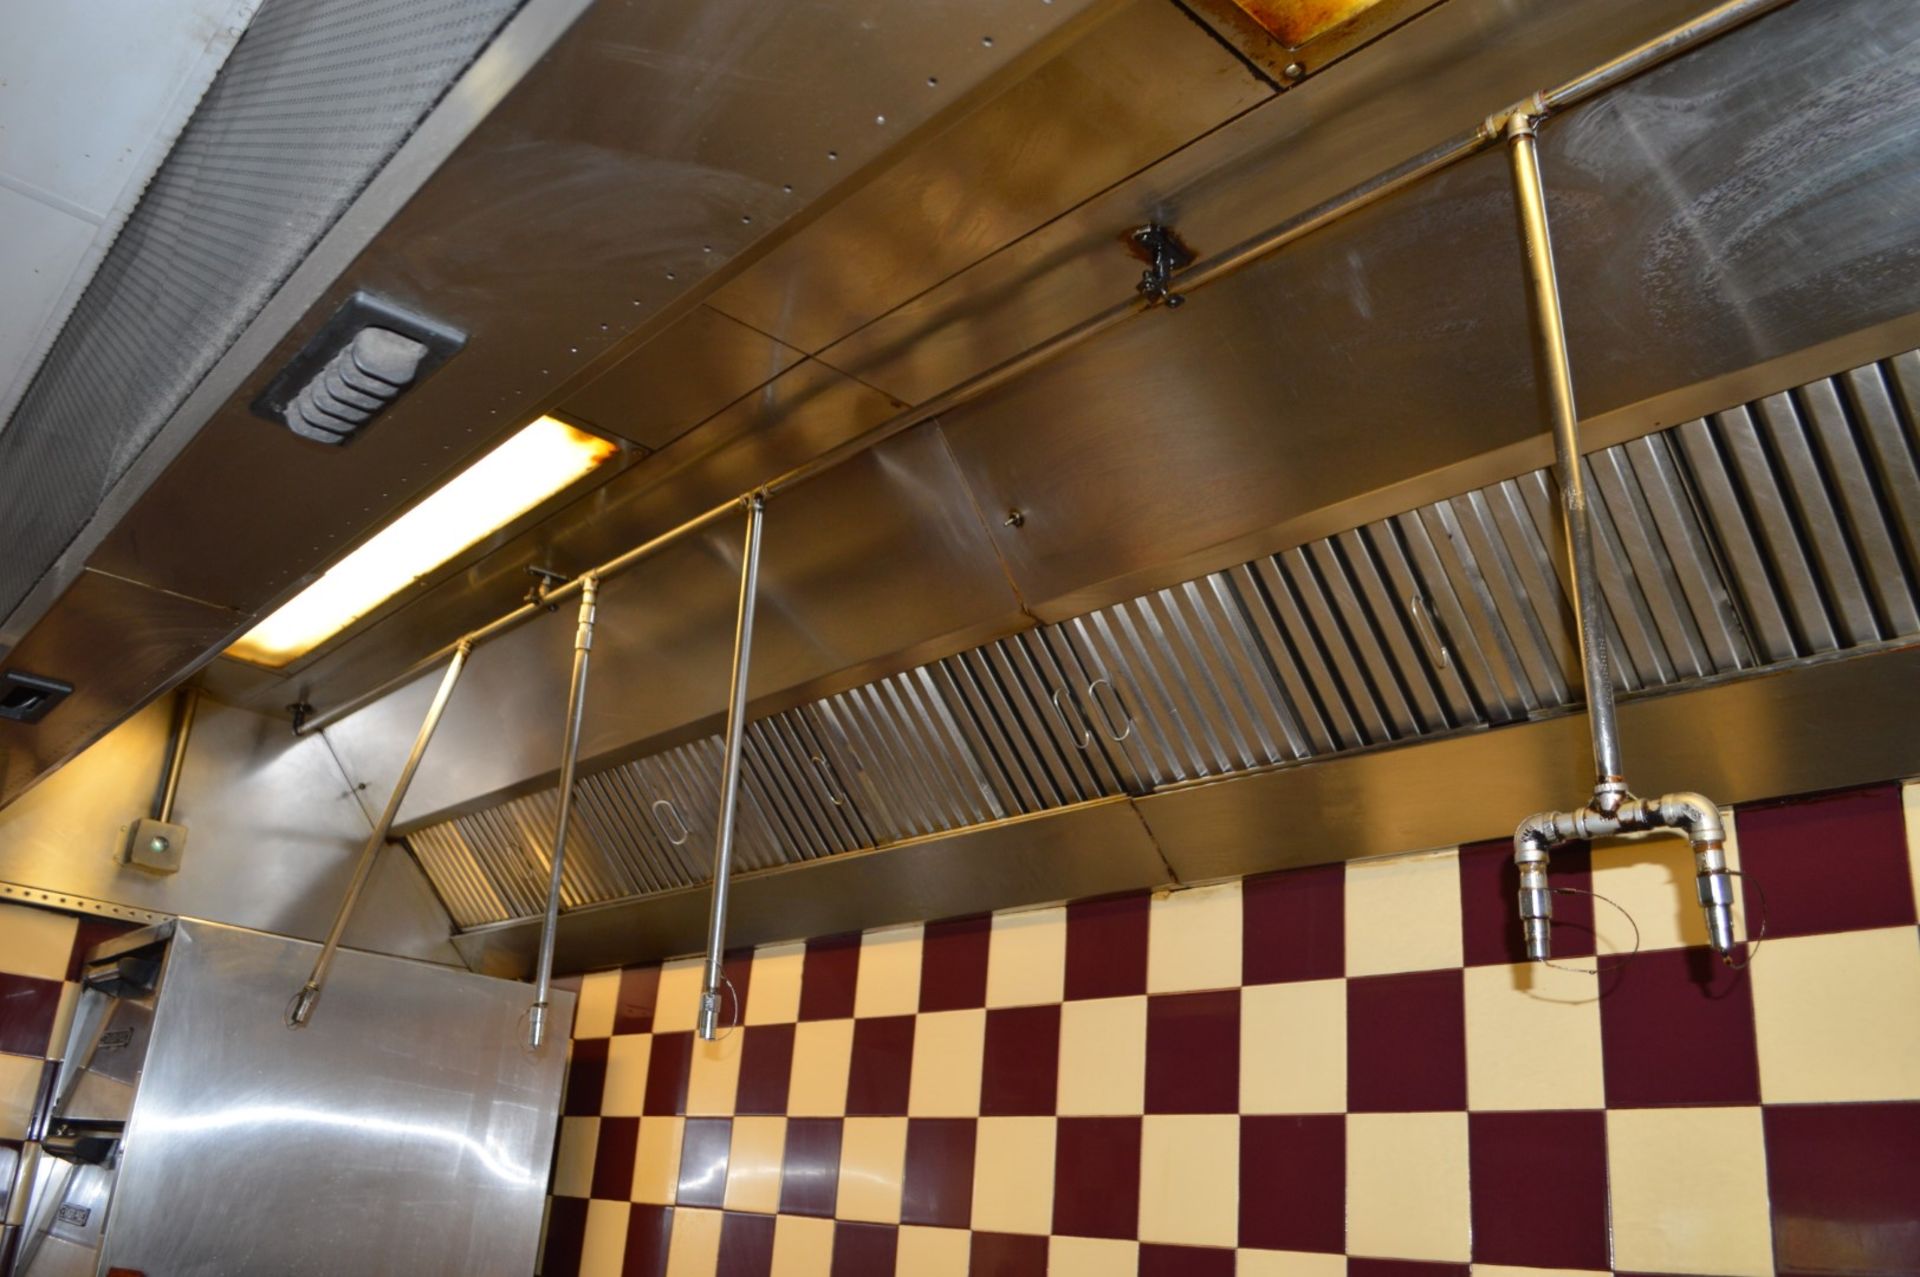 1 x Commercial Stainless Steel Kitchen Extractor Canopy With Ansul R-102 Fire Suppression System - - Image 5 of 13